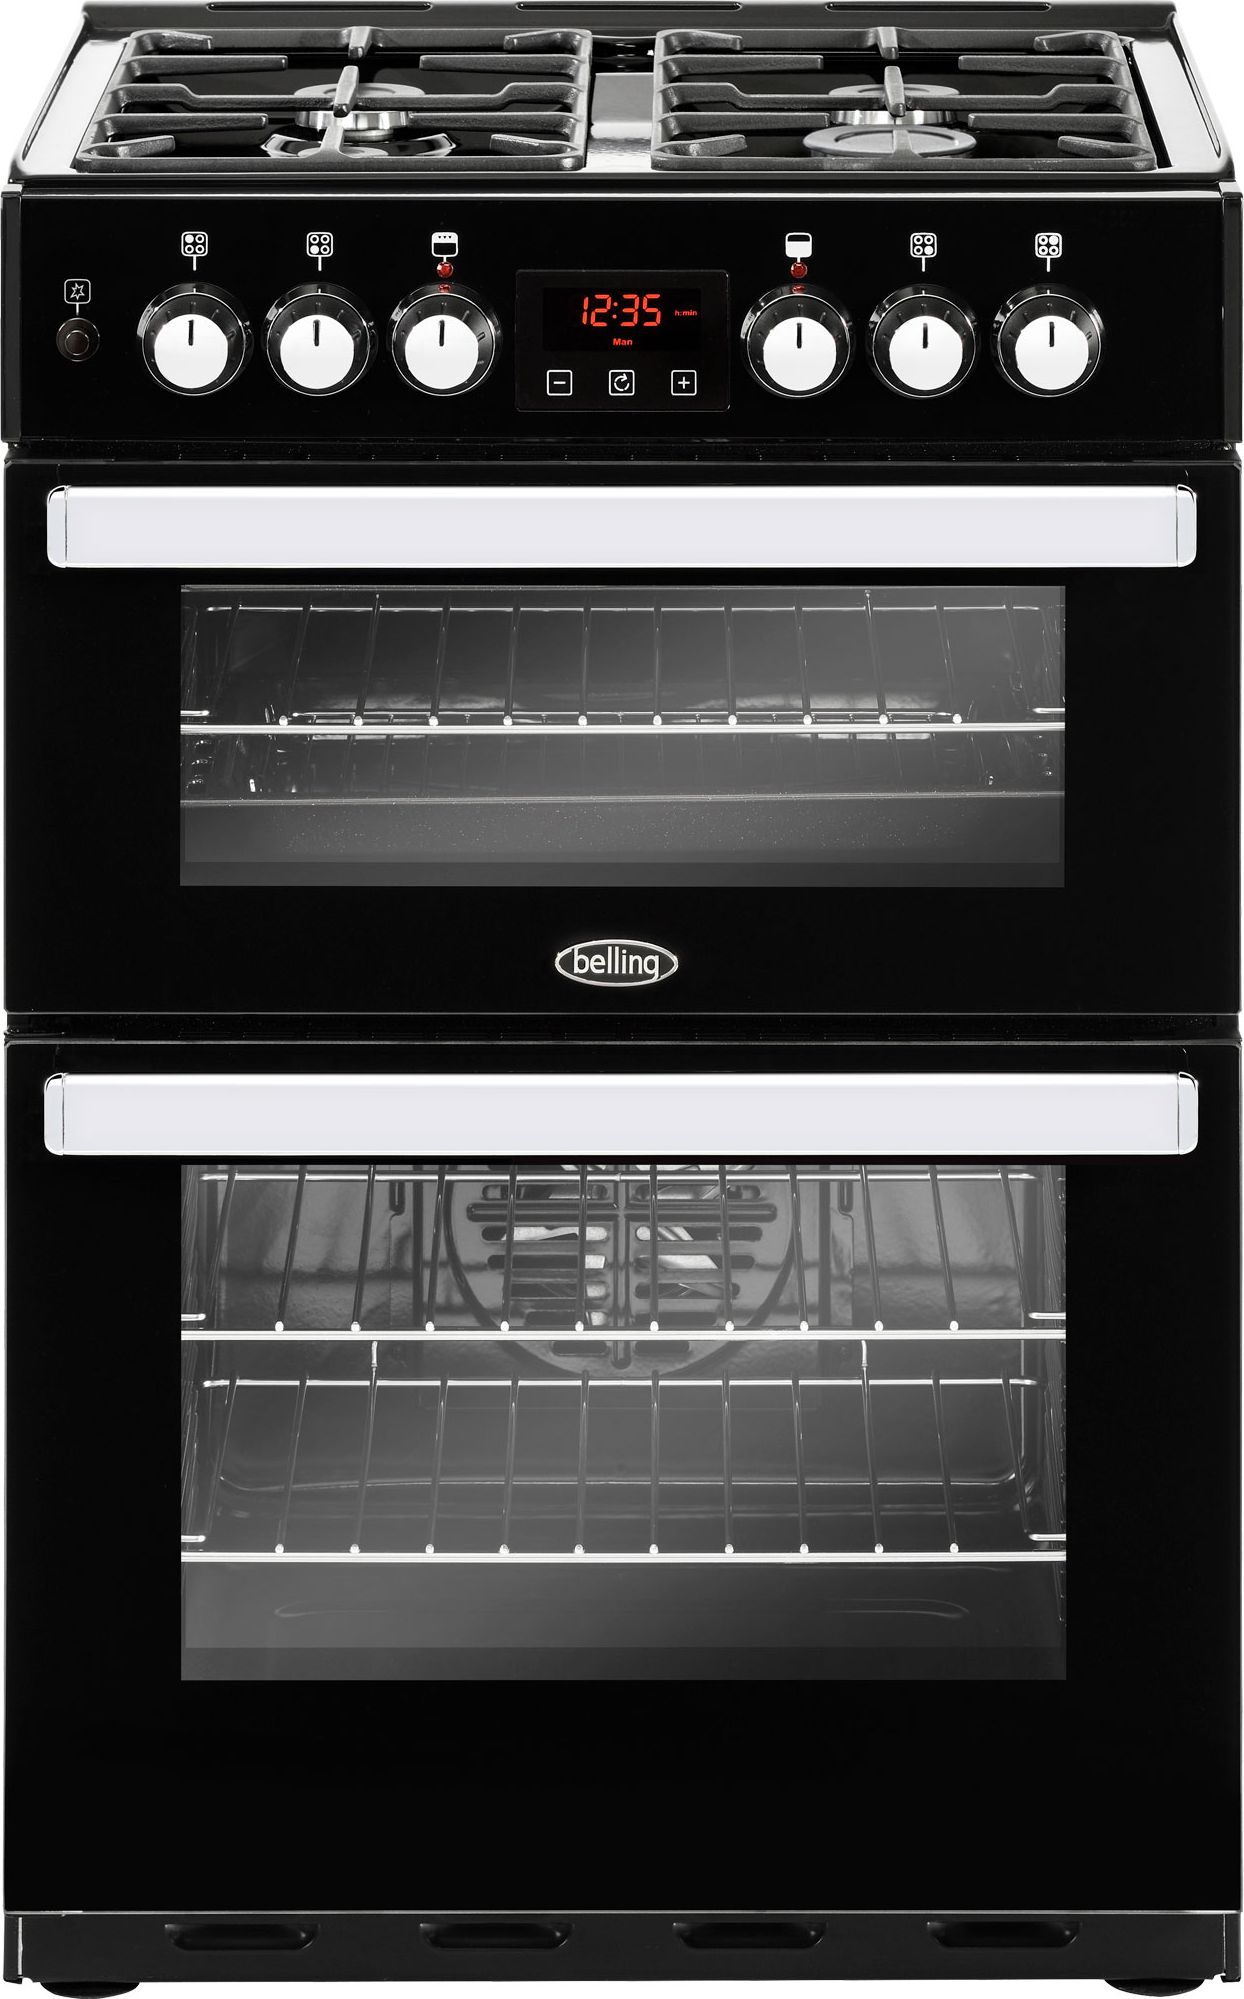 Belling Cookcentre 60DF 60cm Freestanding Dual Fuel Cooker - Black - A/A Rated, Black